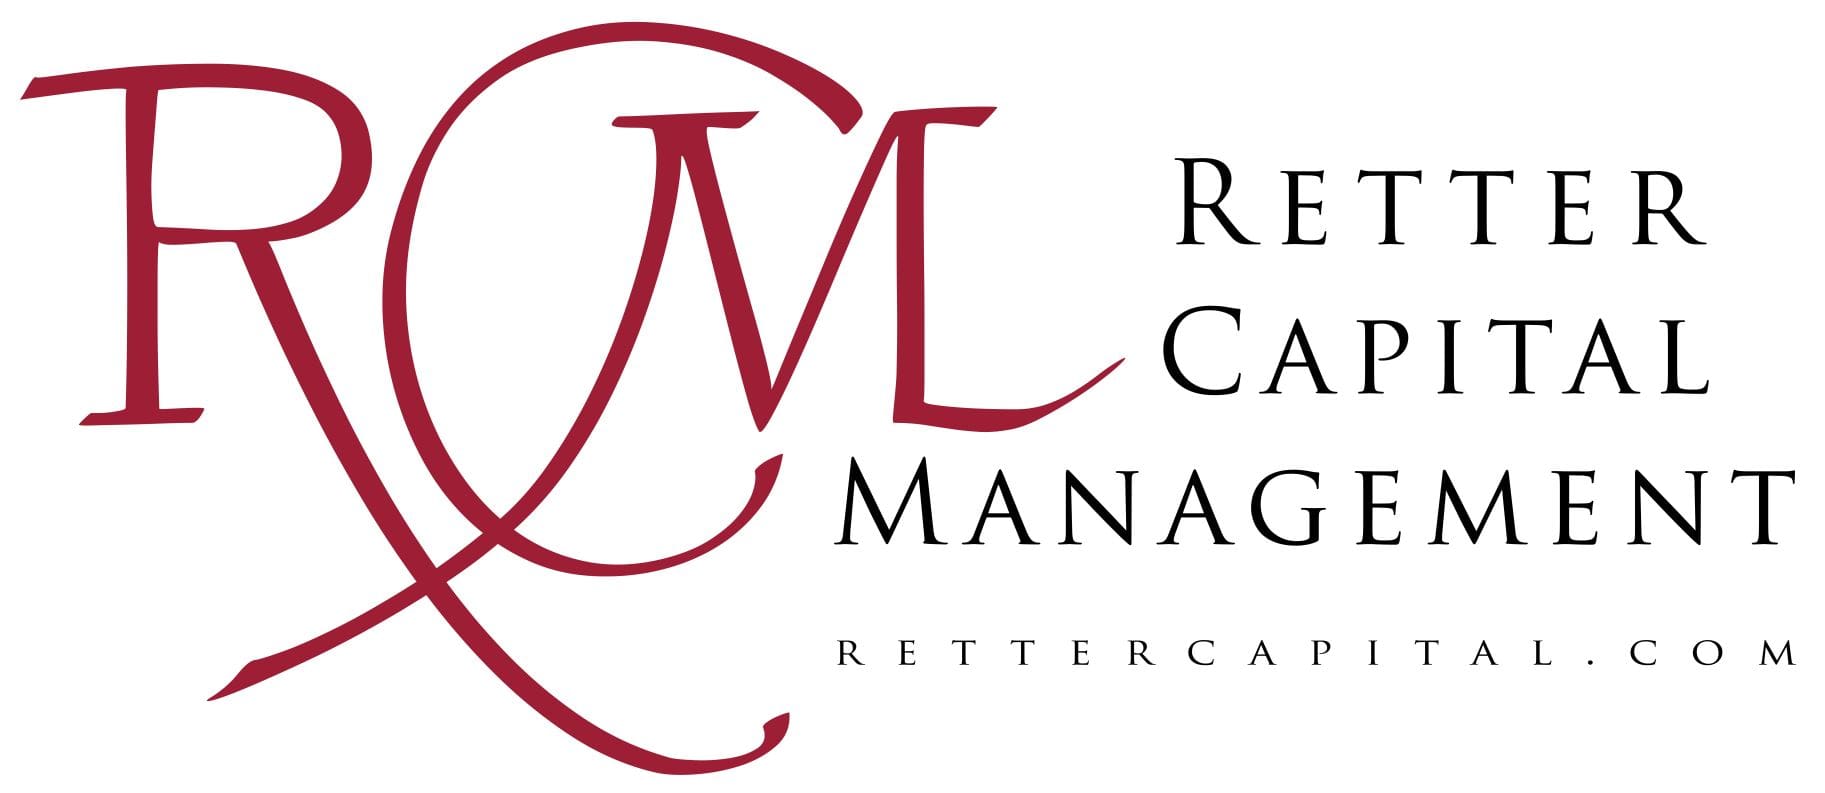 A red and white logo for real estate management.